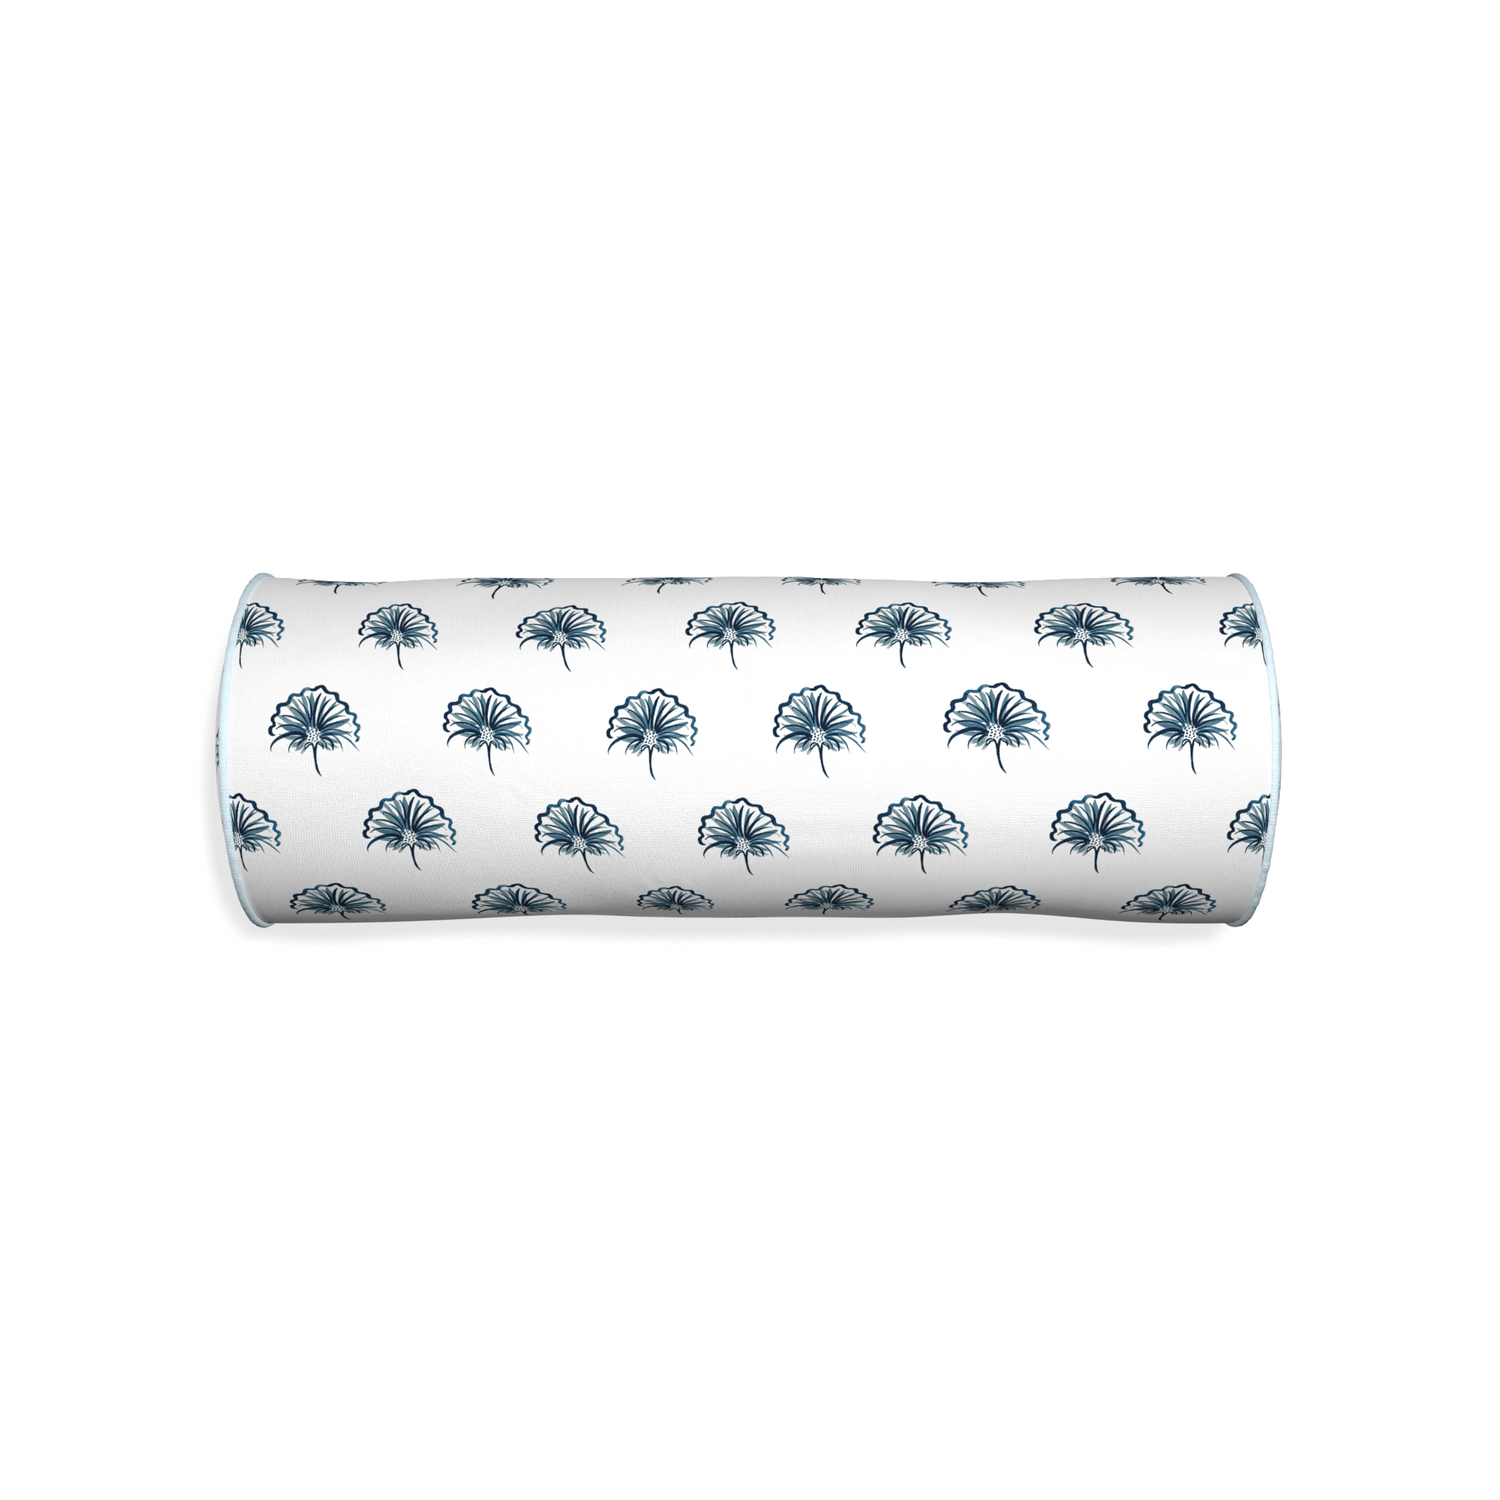 Bolster penelope midnight custom floral navypillow with powder piping on white background